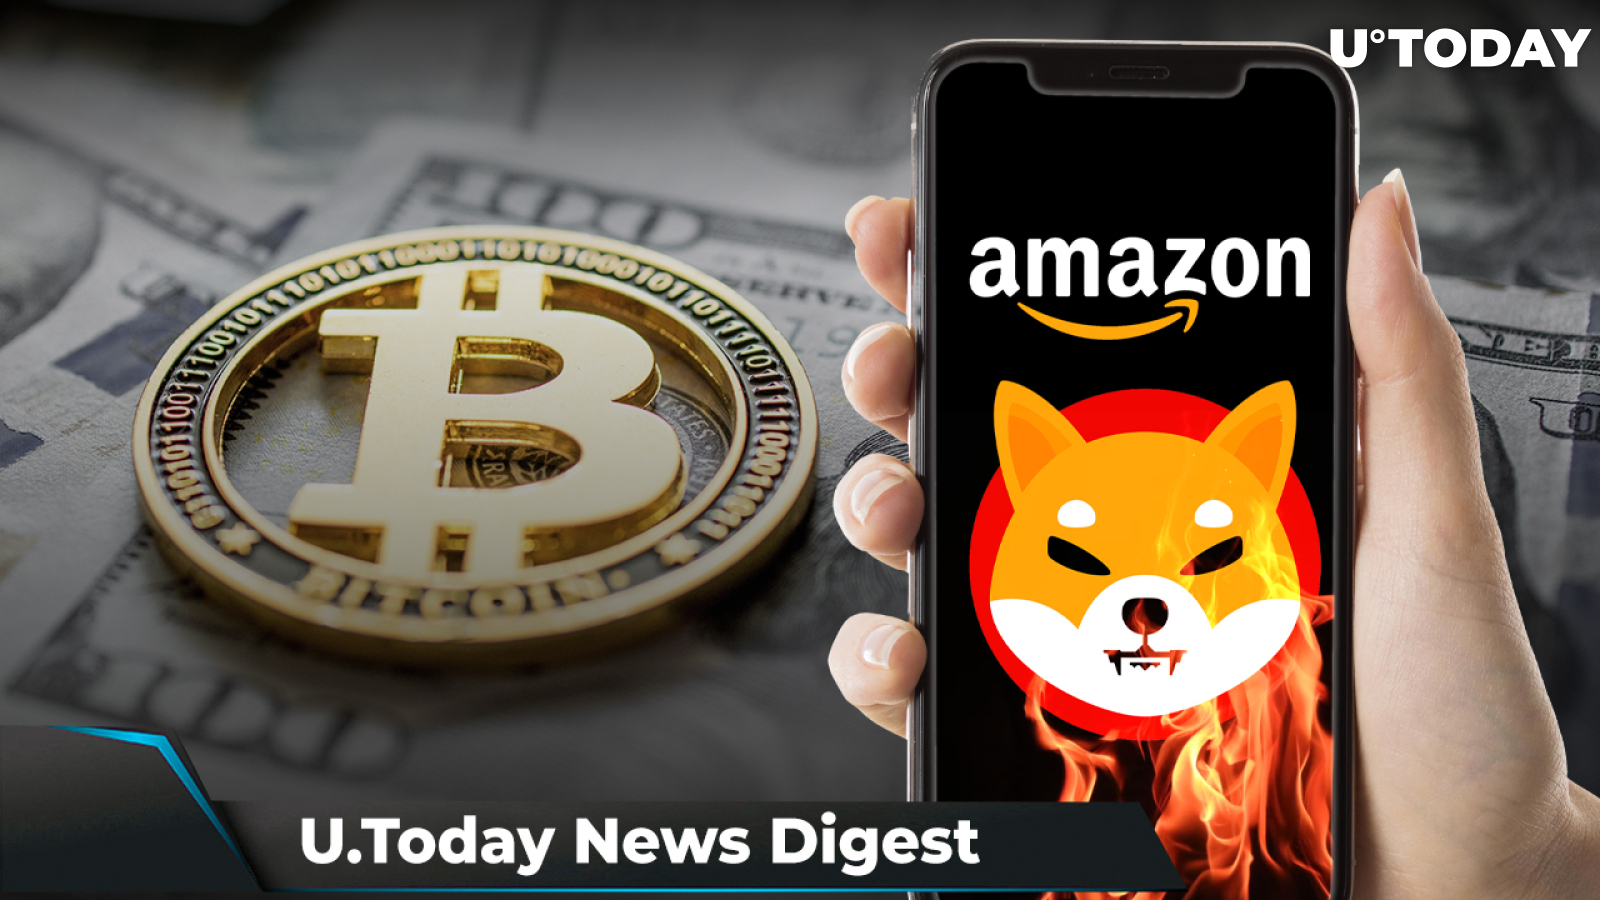 70 Million SHIB Burned via Amazon, Binance to Pause Tron Deposits and Withdrawals, $220,000 for BTC Still in Play: Crypto News Digest by U.Today